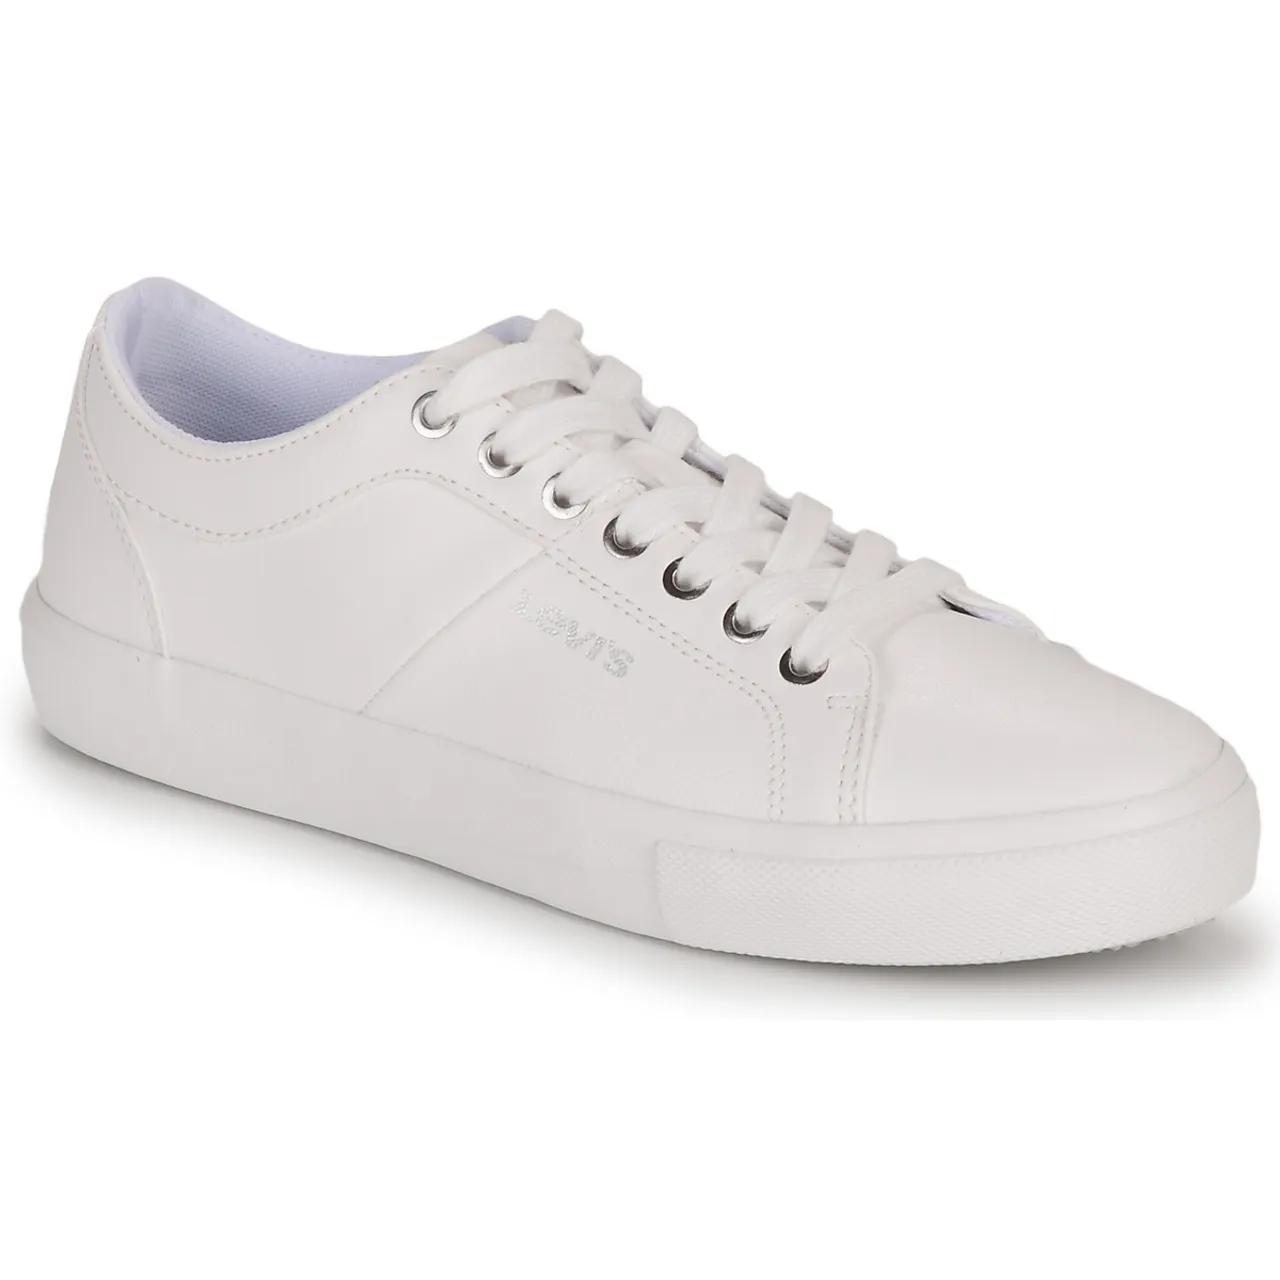 Levis  WOODWARD S  women's Shoes (Trainers) in White